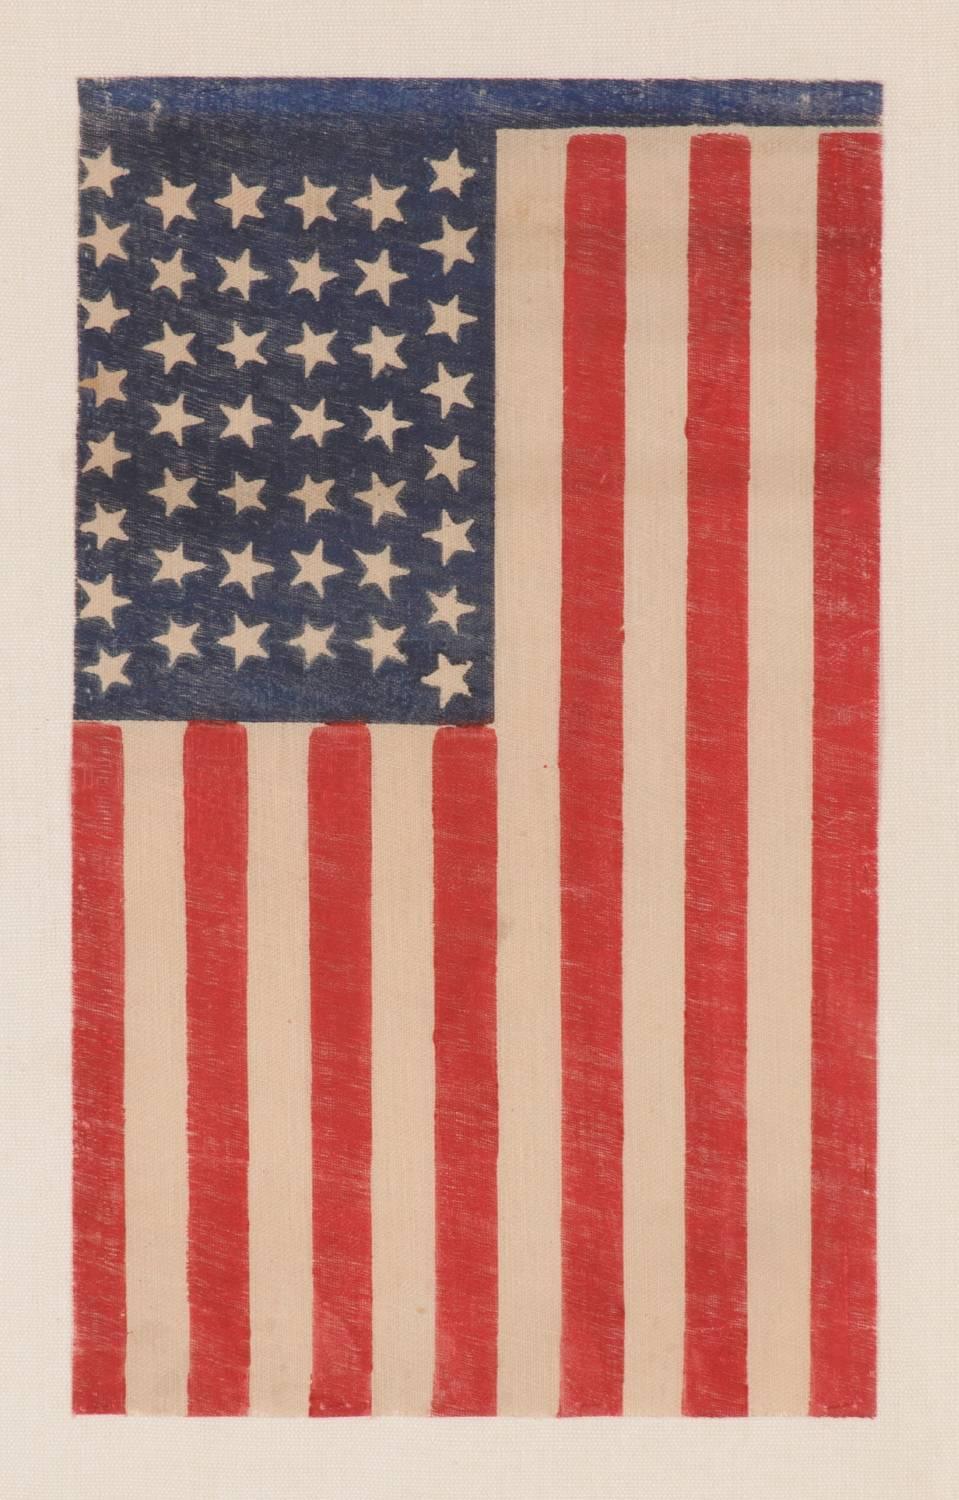 44 tumbling stars in an hourglass formation, on an antique American parade flag of the 1890-1896 period, reflects Wyoming statehood: 

44 star American parade flag, printed on coarse, glazed cotton. The stars are configured in rows of 8-7-7-7-7-8,